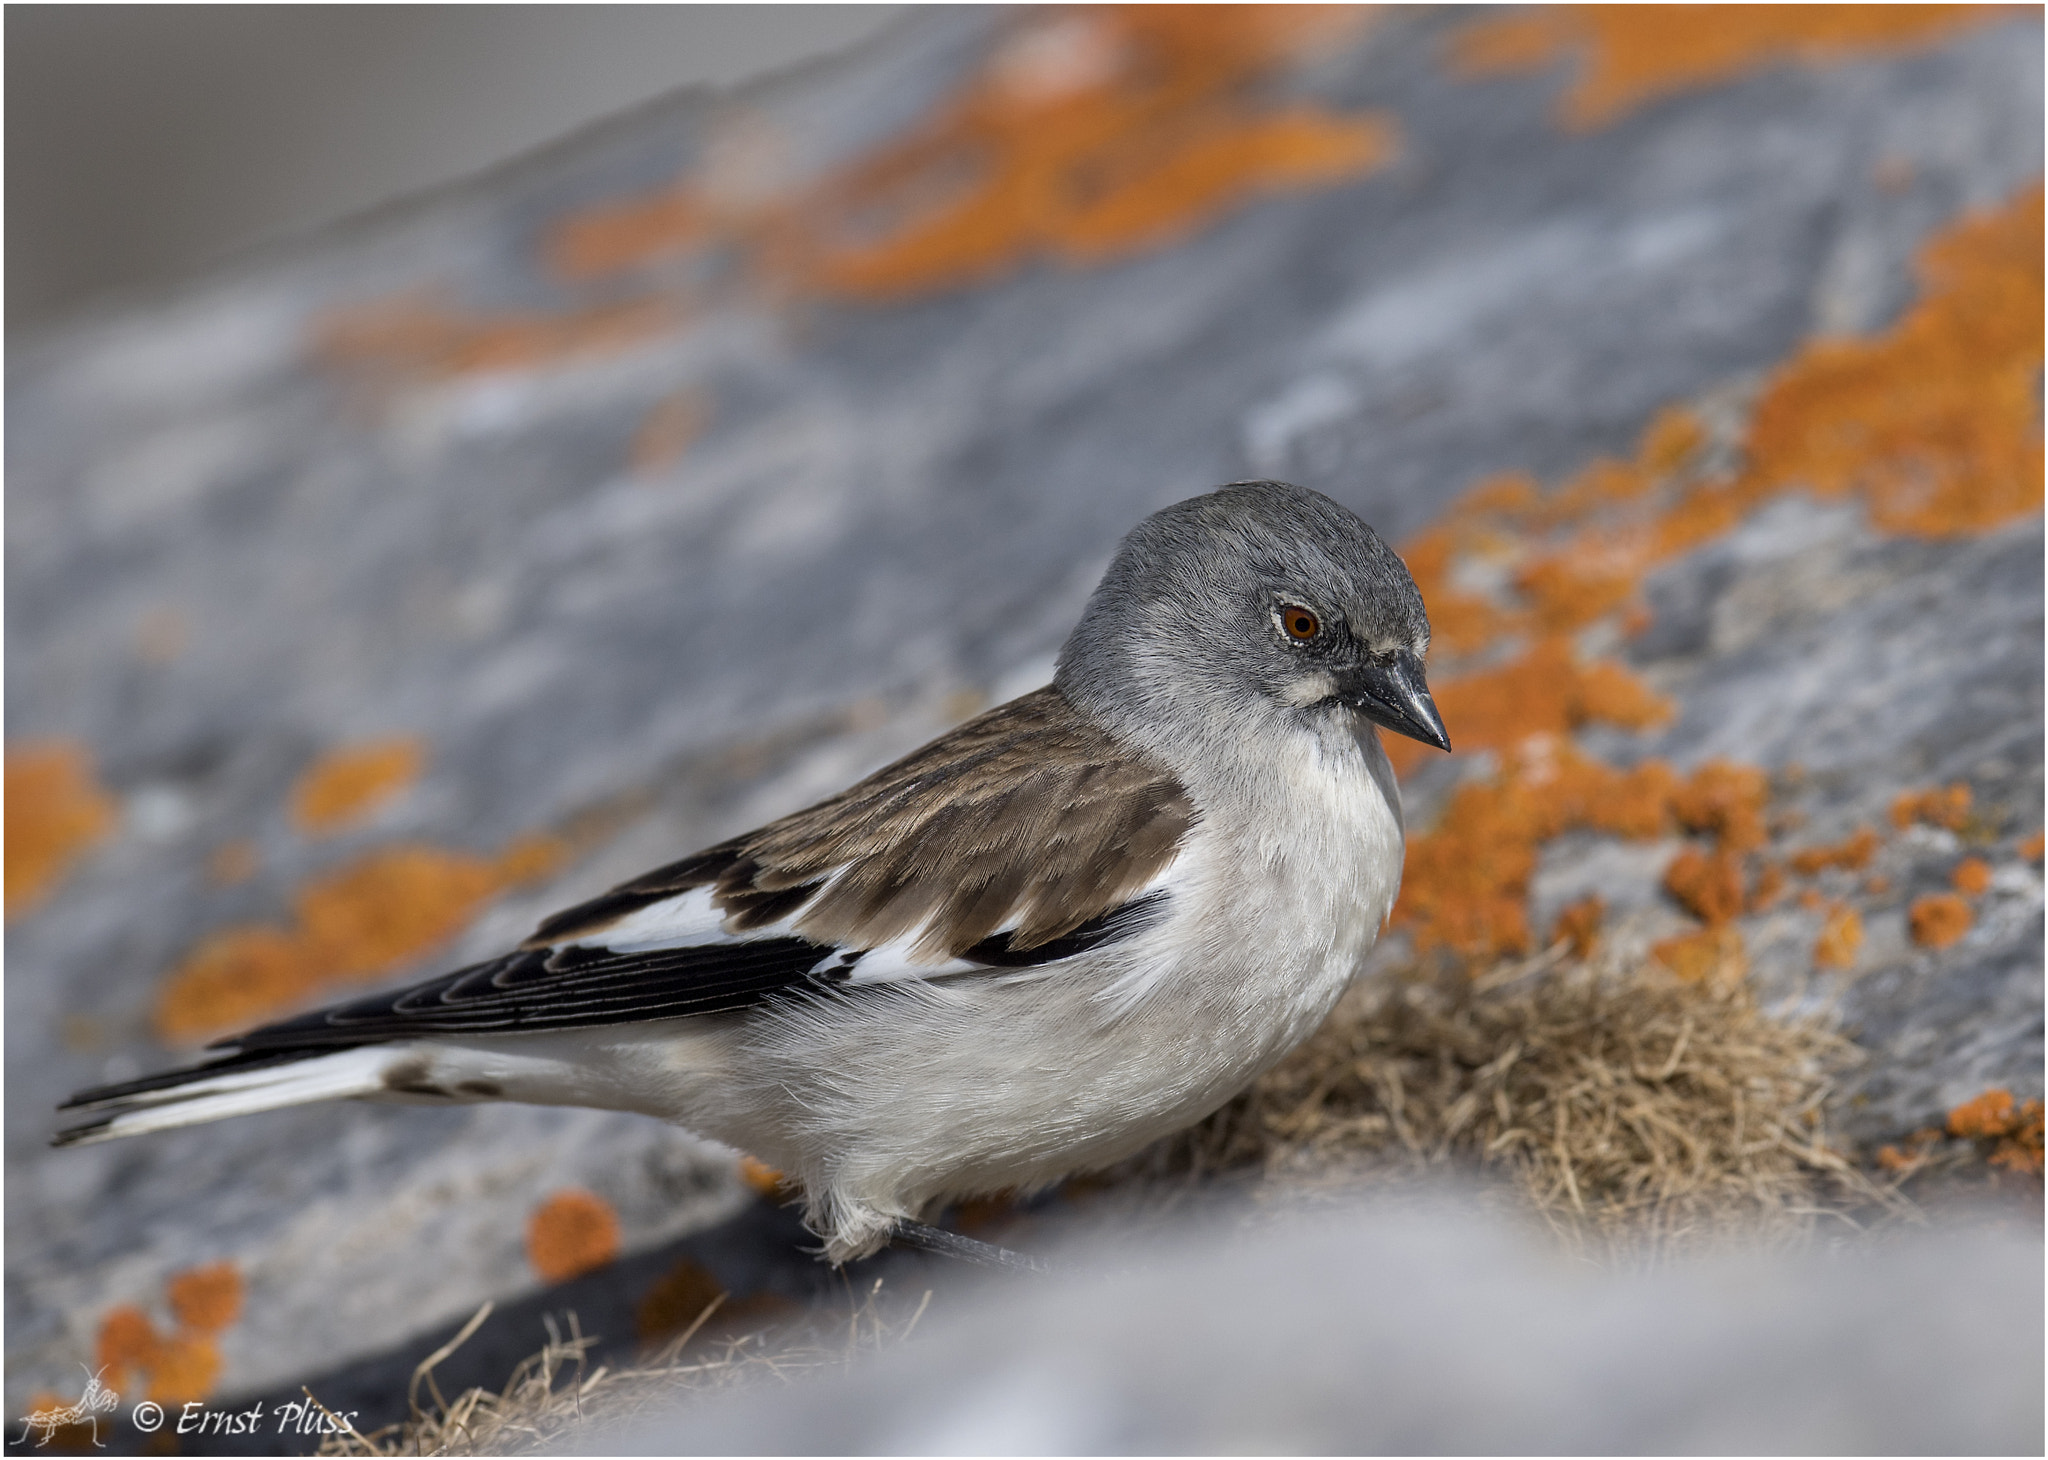 Nikon D5 sample photo. White-winged snowfinch photography